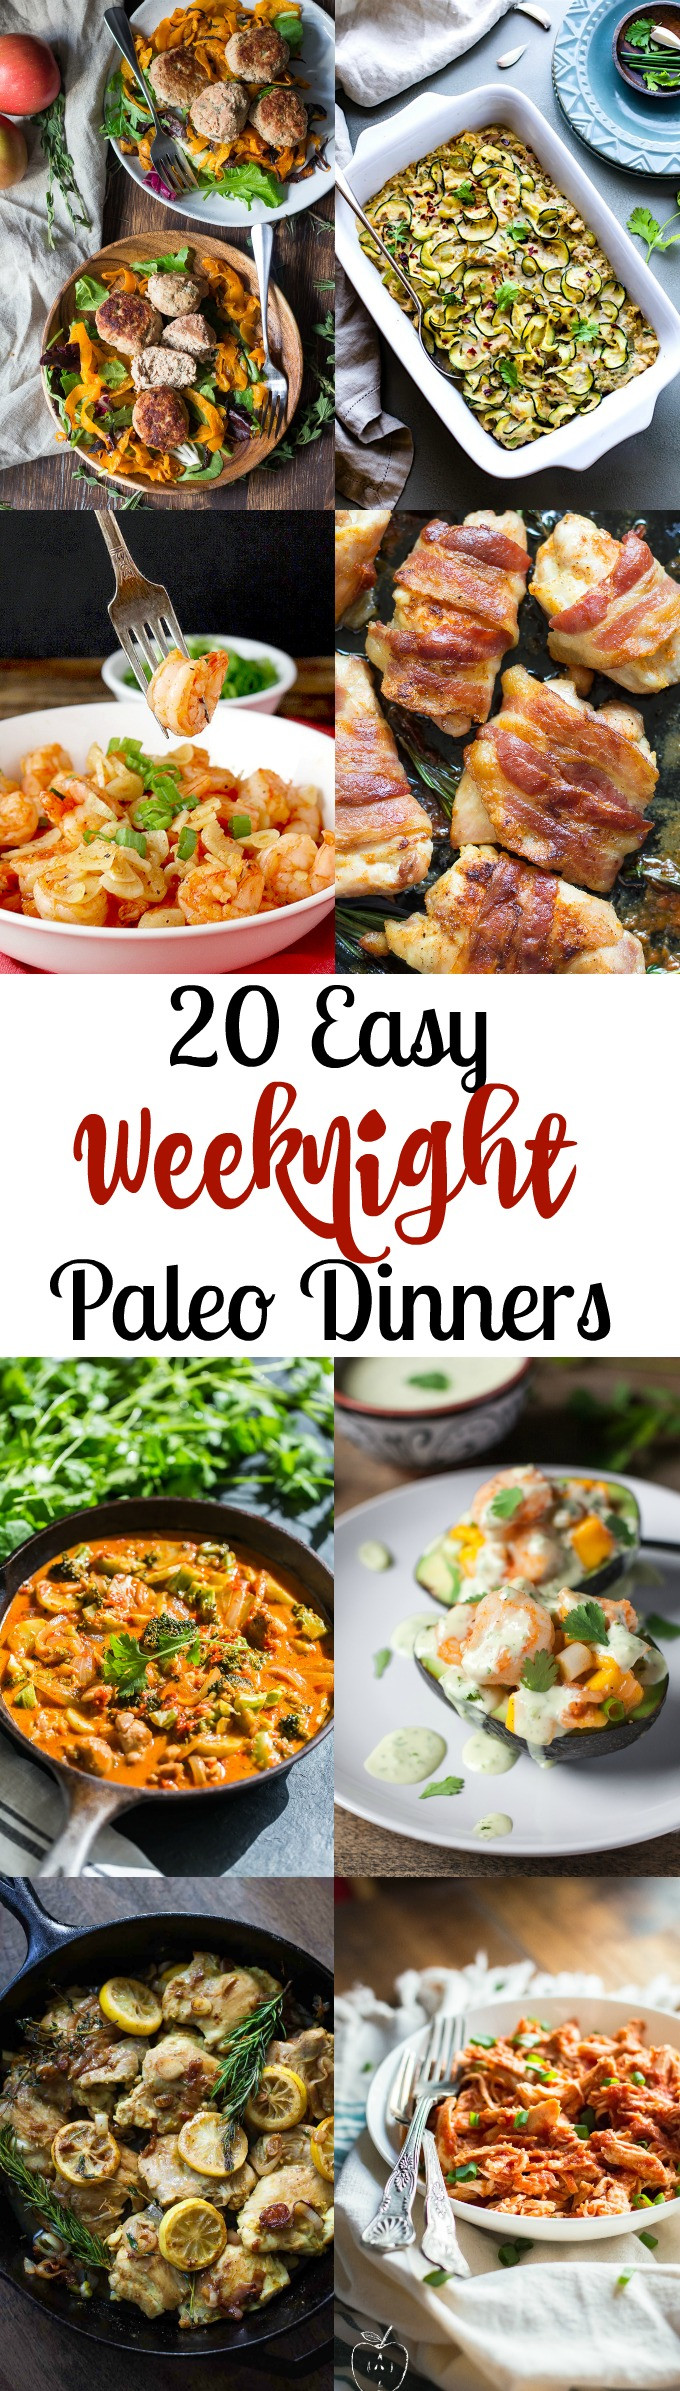 Quick Easy Kid Friendly Dinners
 20 Easy Paleo Dinners for Weeknights